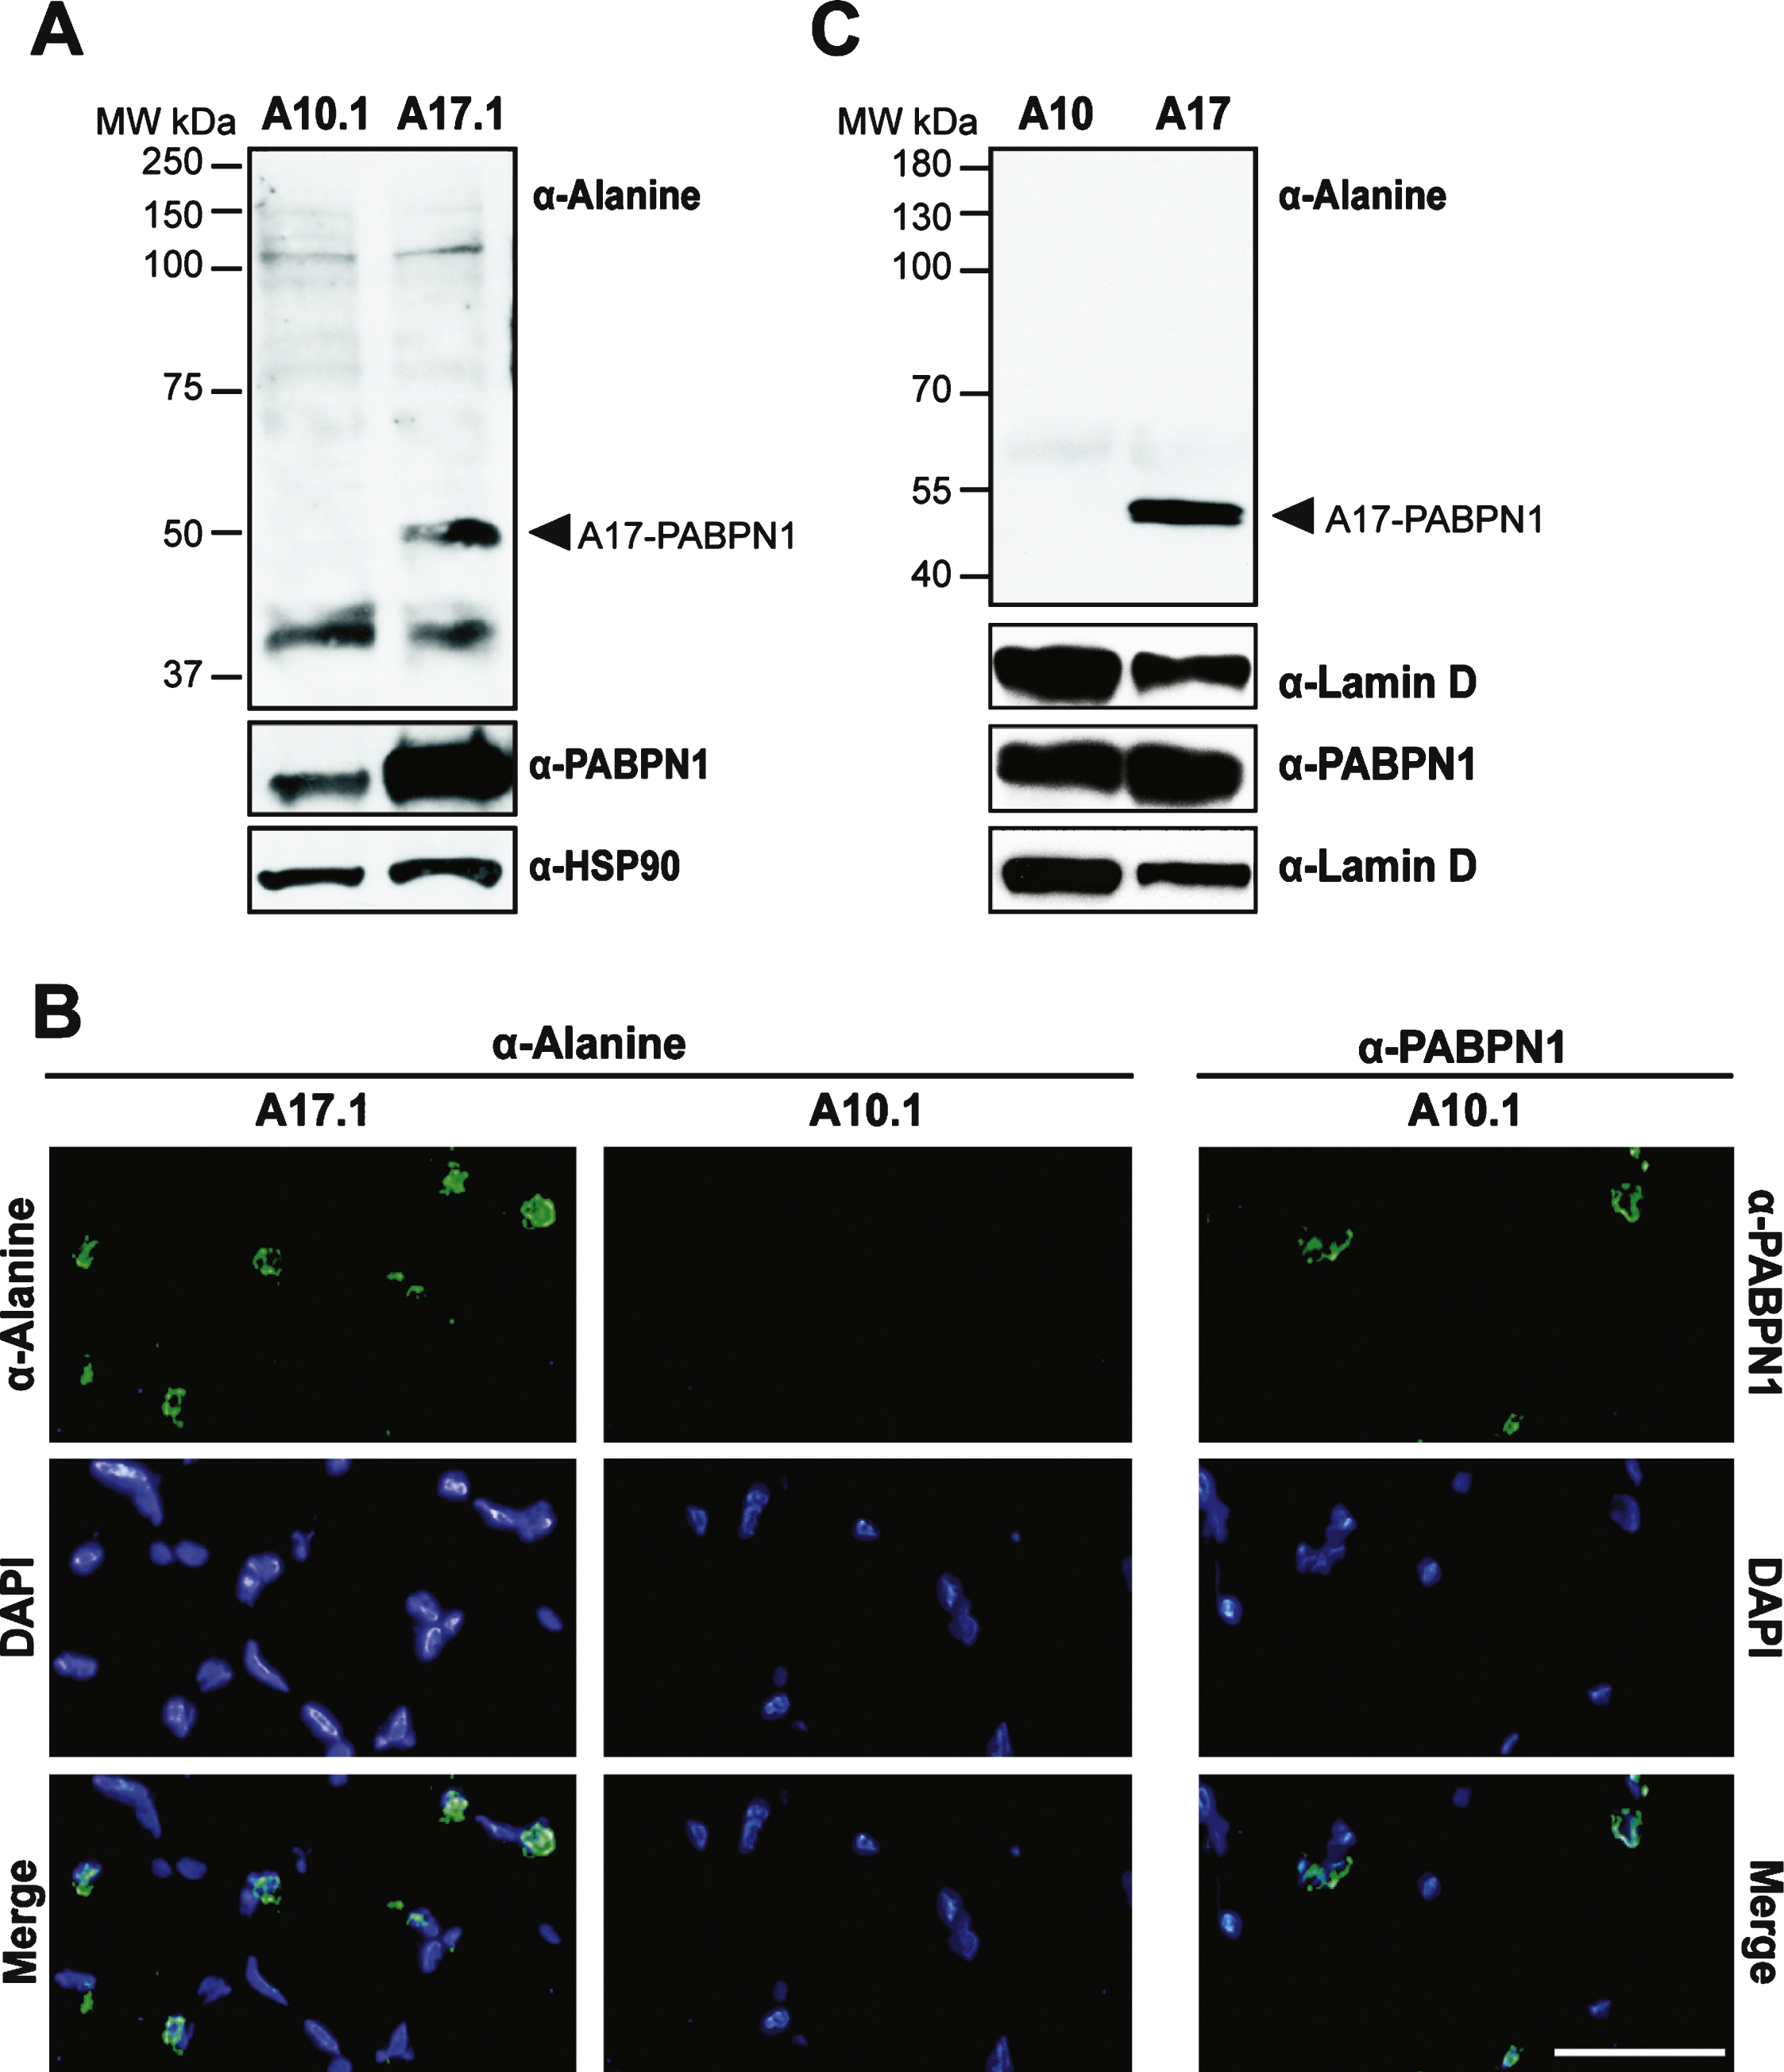 Use of the α-alanine antibody in a transgenic mouse model of OPMD. A) Immunoblots of whole muscle lysate from mice expressing transgenic wild type (A10.1) or alanine-expanded PABPN1 (A17.1) were probed with α-Alanine antibody. Samples were also probed with α-PABPN1 and α-HSP90 as controls. B) Immunostaining of tibialis anterior muscle sections from A10.1 and A17.1 animals stained with α-Alanine antibody. Immunostaining with α-PABPN1 was used to confirm the presence of PABPN1 protein in A10.1 animals and DAPI was used to stain nuclei. Merge image (bottom panels) is included to show co-localization of both A17 and wild type PABPN1 with nuclei. Bar = 5 μm. C) Immunoblots of whole fly lysates from flies expressing muscle-specific A10- or A17-PABPN1 probed with α-Alanine antibody. Samples were also probed with α-PABPN1 to detect PABPN1 and with α-Lamin D to detect lamin D as a loading control.